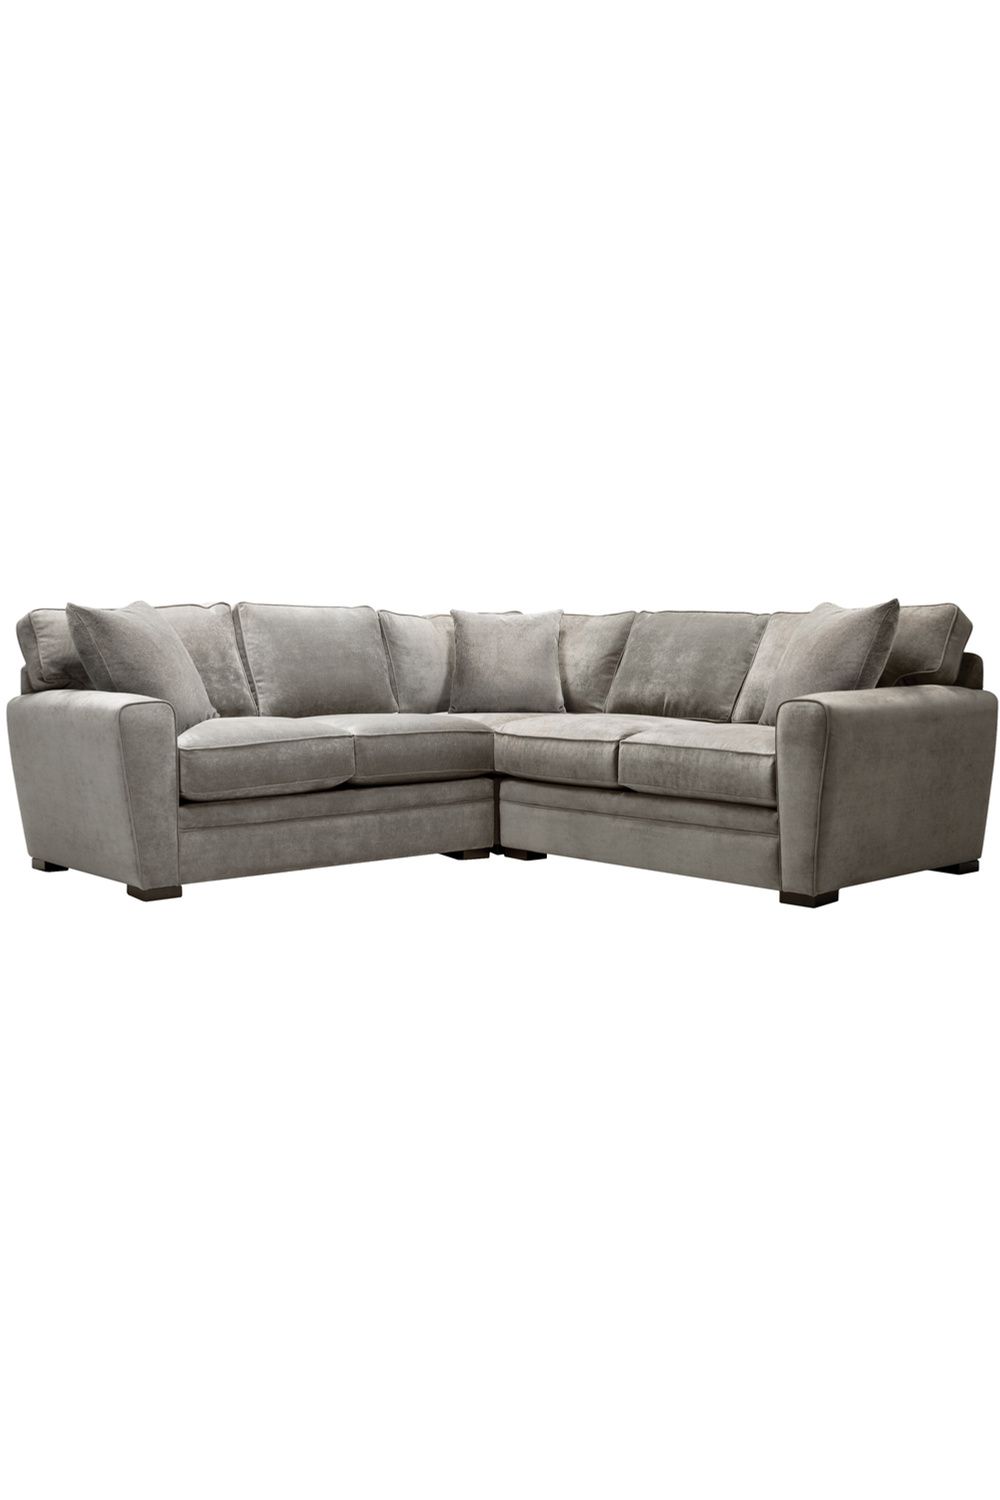 Exploring the Benefits of a Microfiber
Sectional Sofa in a Family Home